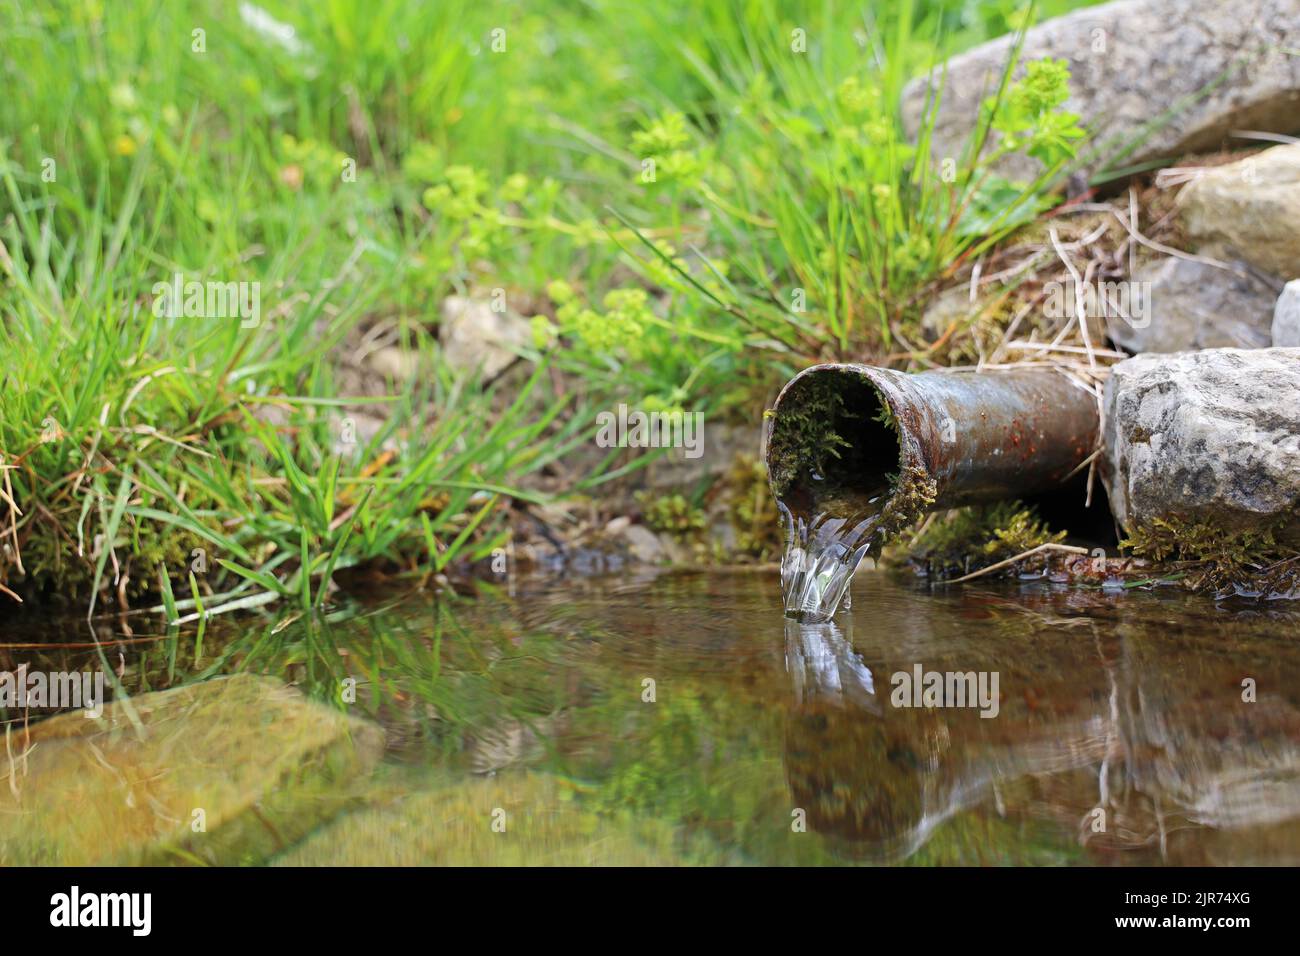 crystal clear water pouring from a metal pipe in the mountains Stock Photo